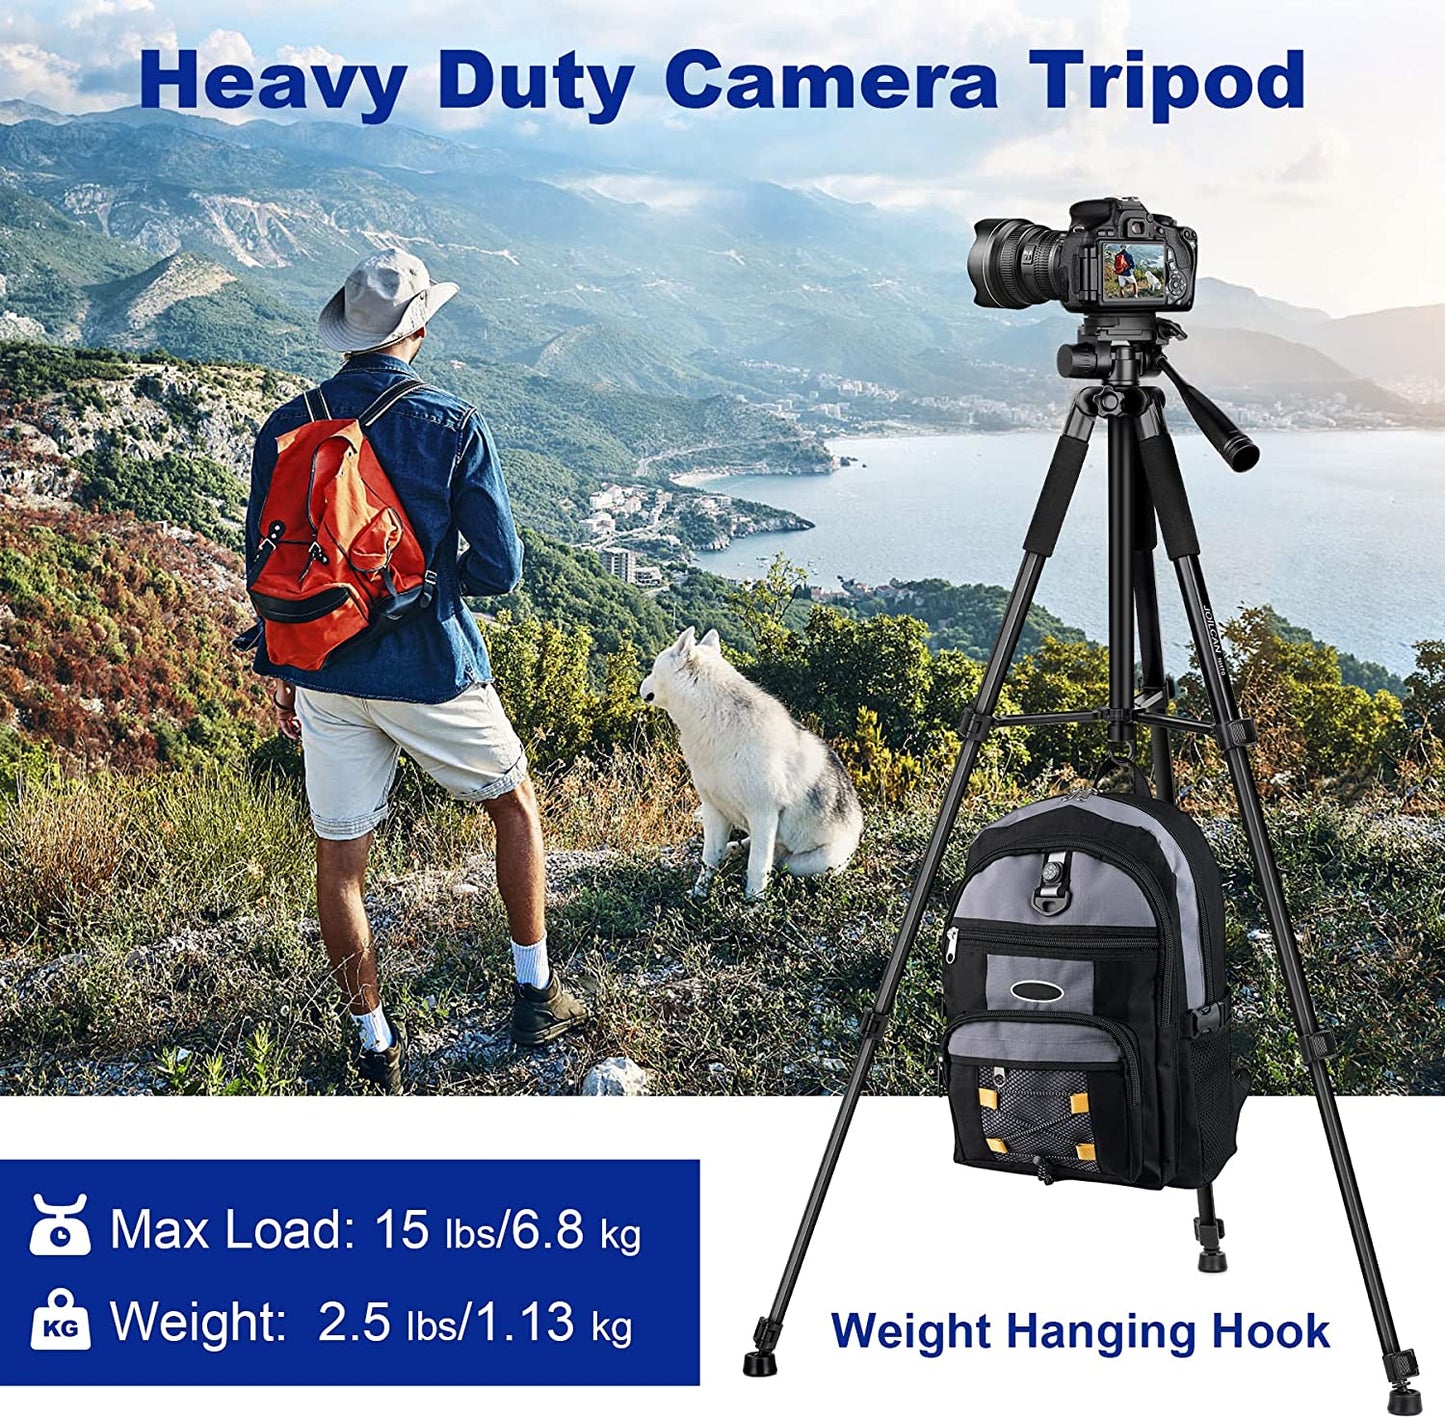 Camera Tripod, 67" Tripod for Camera Stand, Heavy Duty Tripod with Remote & Travel Bag for Projectors, Lasers, DSLR, Webcam, Aluminum Phone Tripod for Video Recording Photo Vlogging(USA)